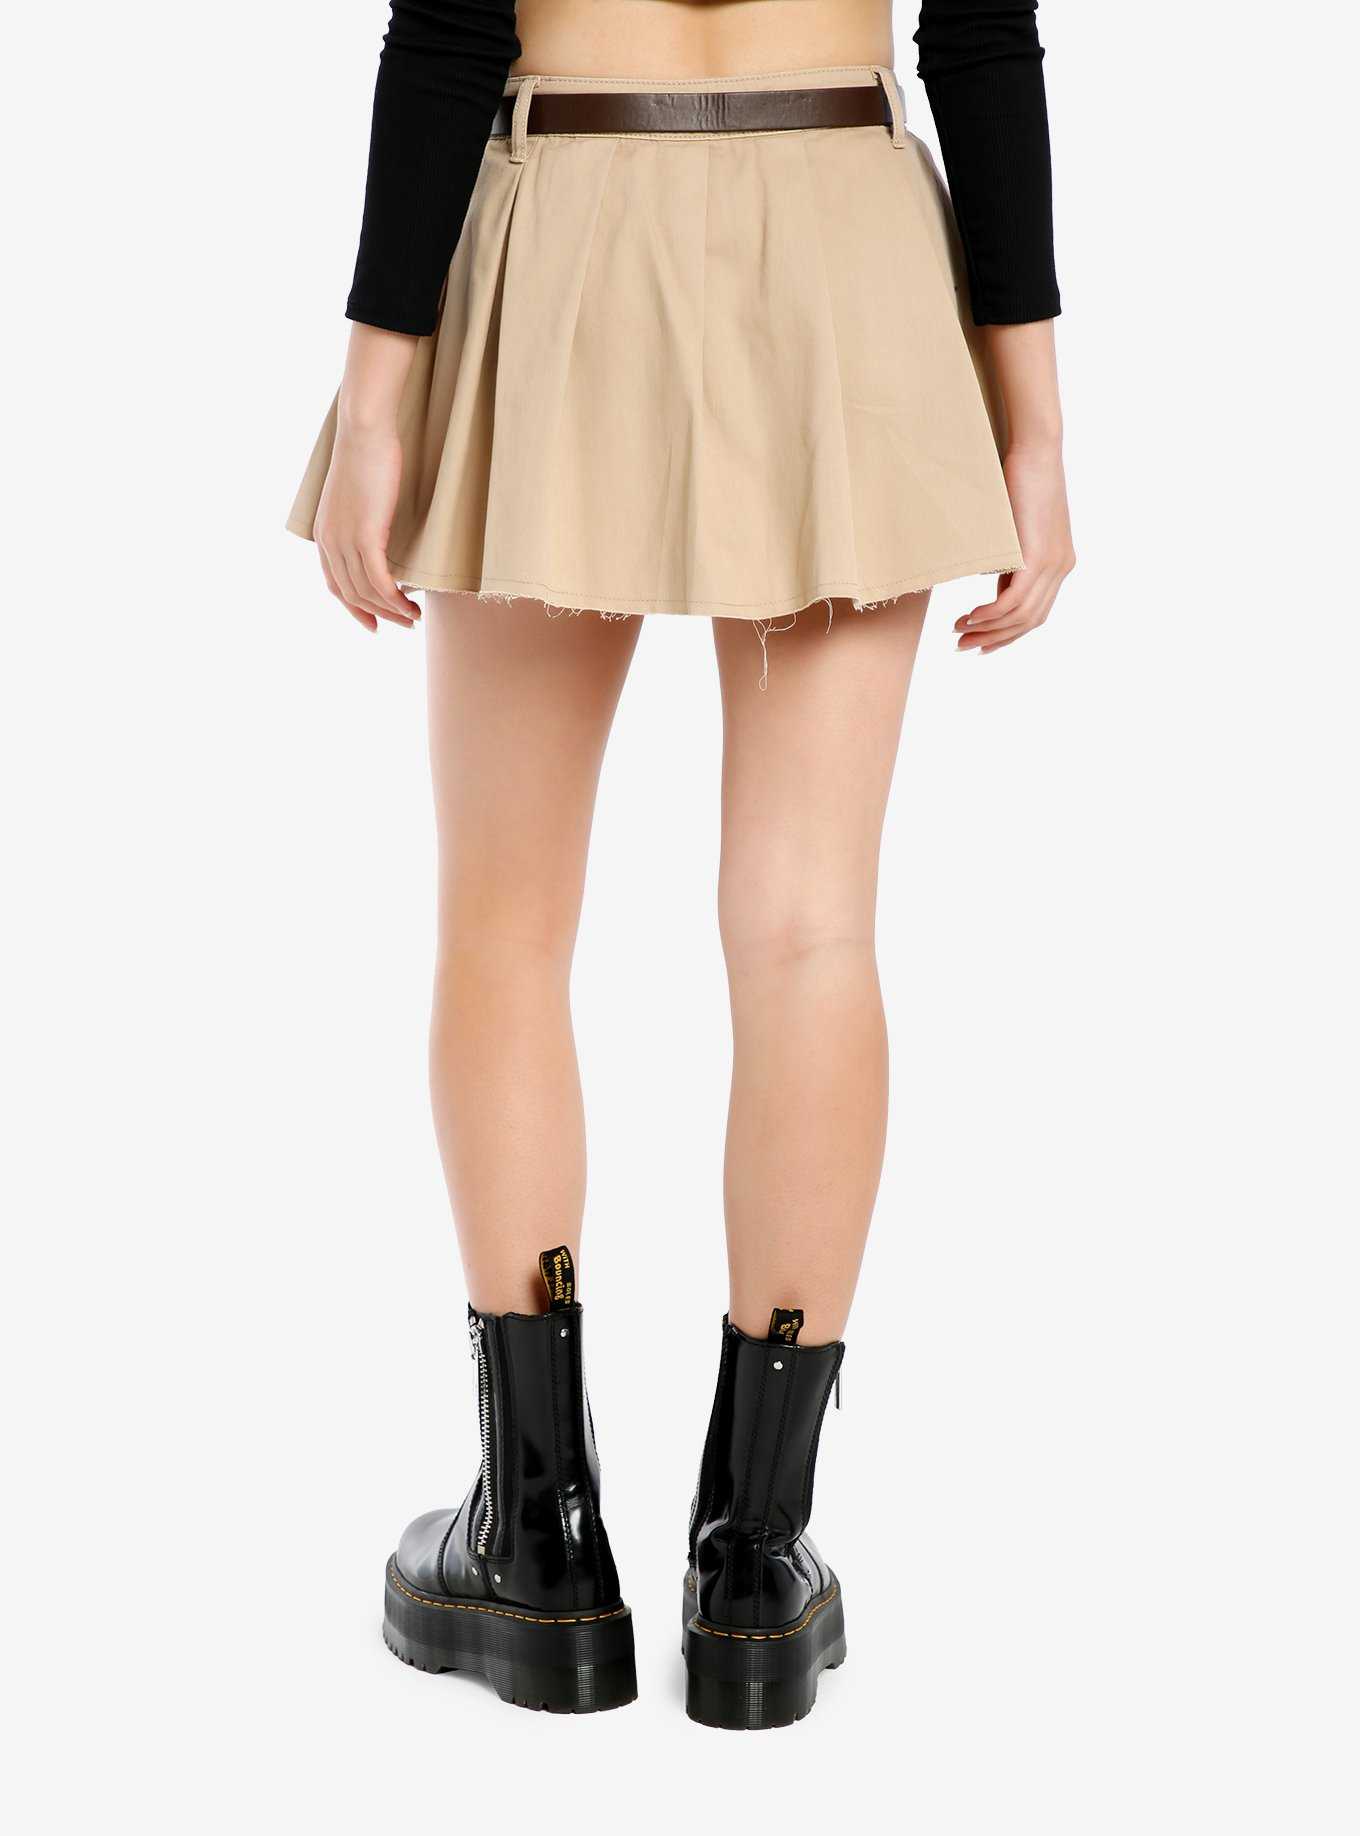 Social Collision Khaki Belted Low-Rise Pleated Mini Skirt, , hi-res